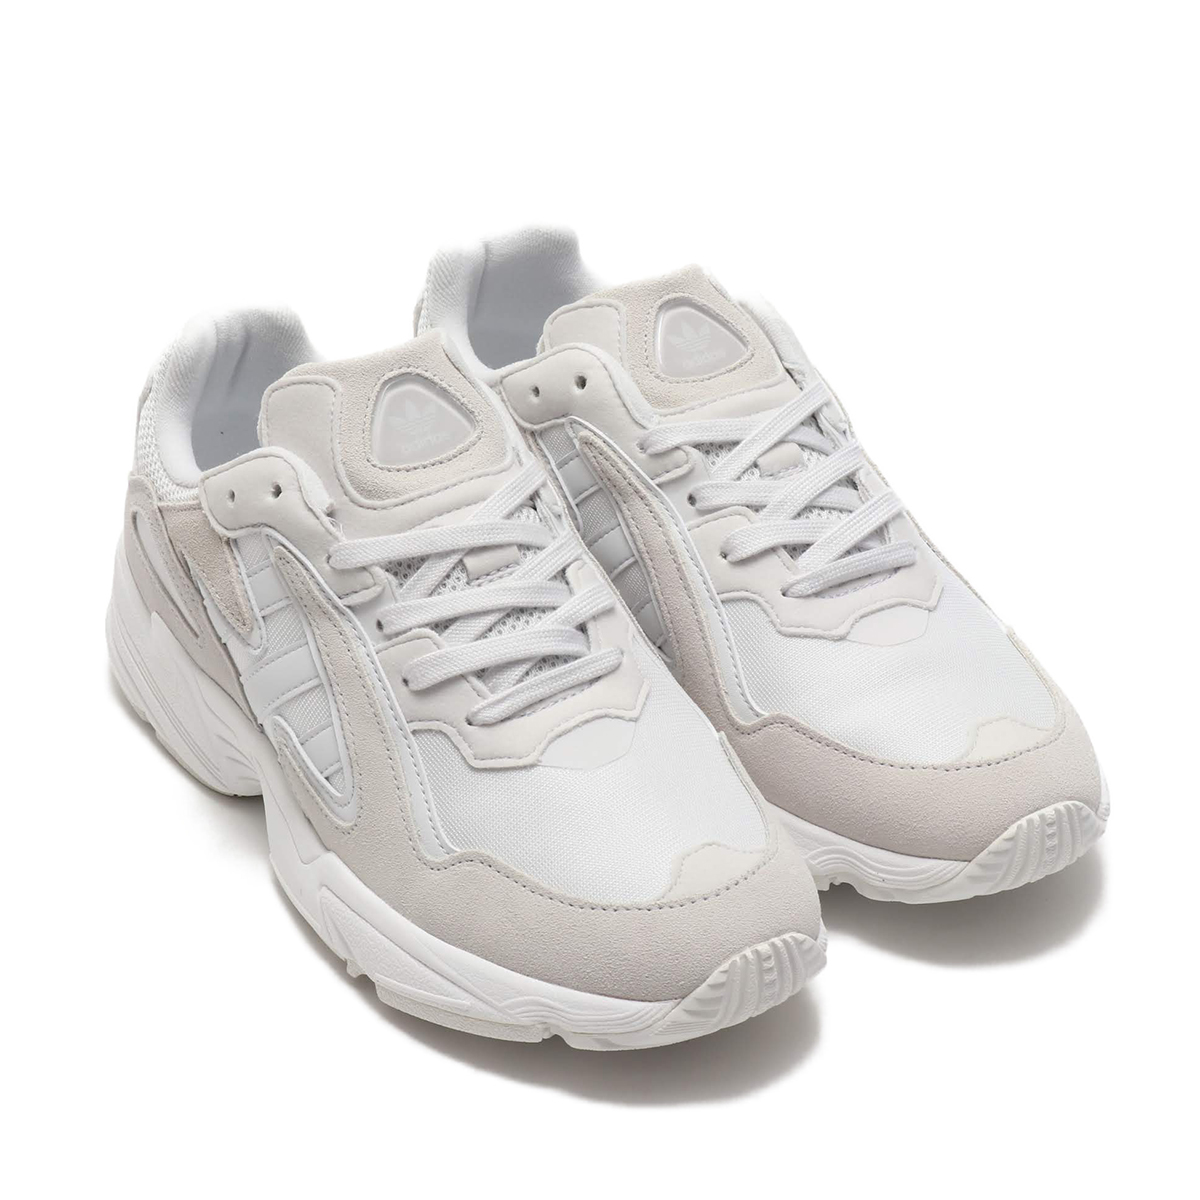 Yung 96 Chasm White Cheap Online